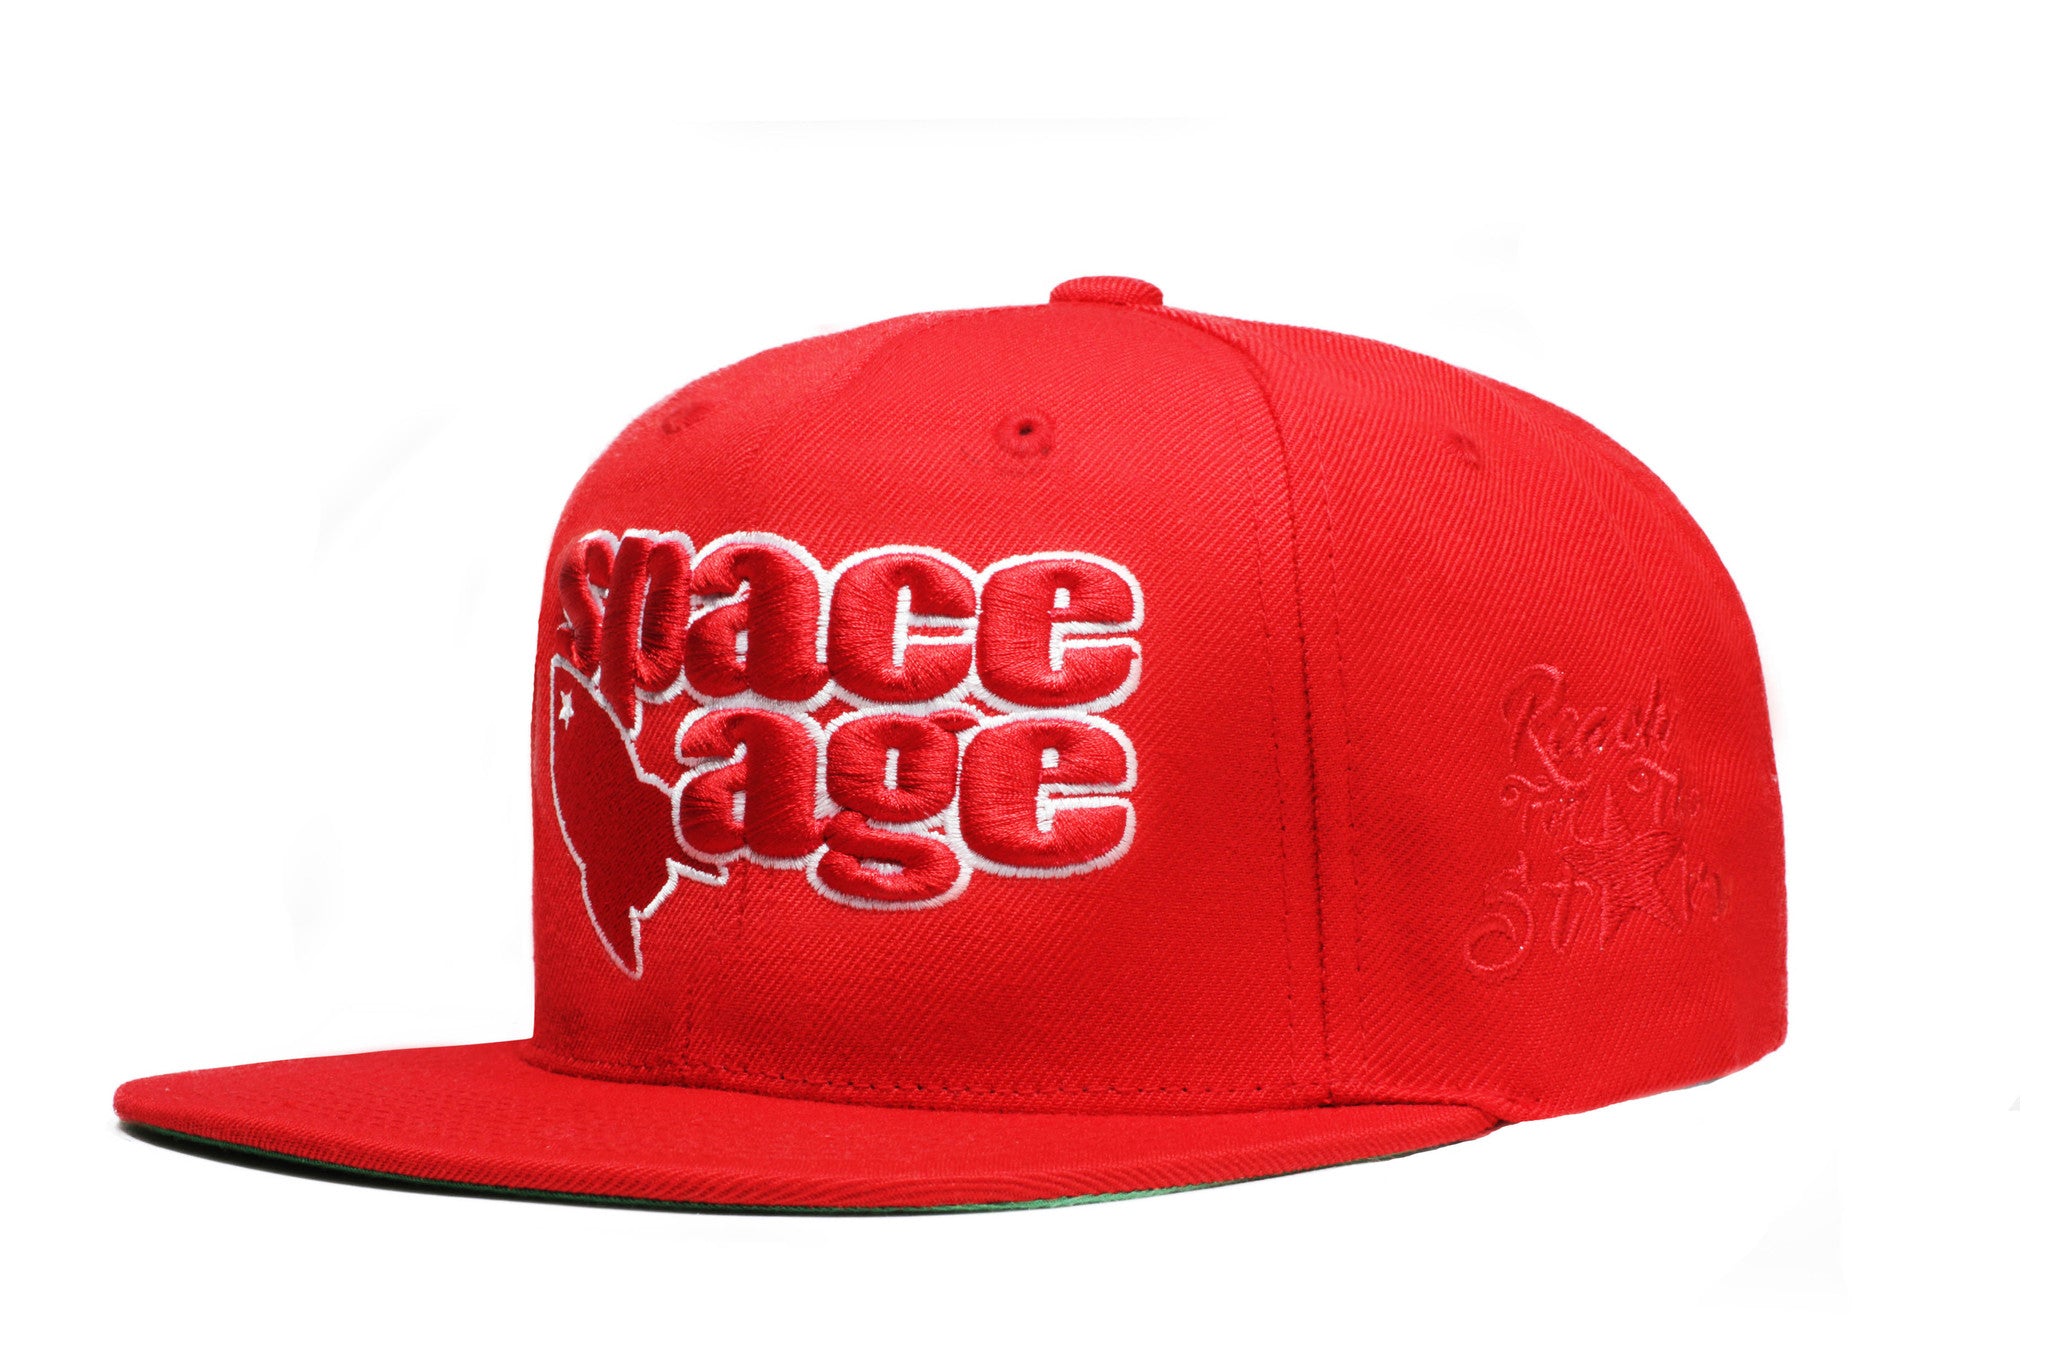 Space Age Snap Back  - Red / White / Red